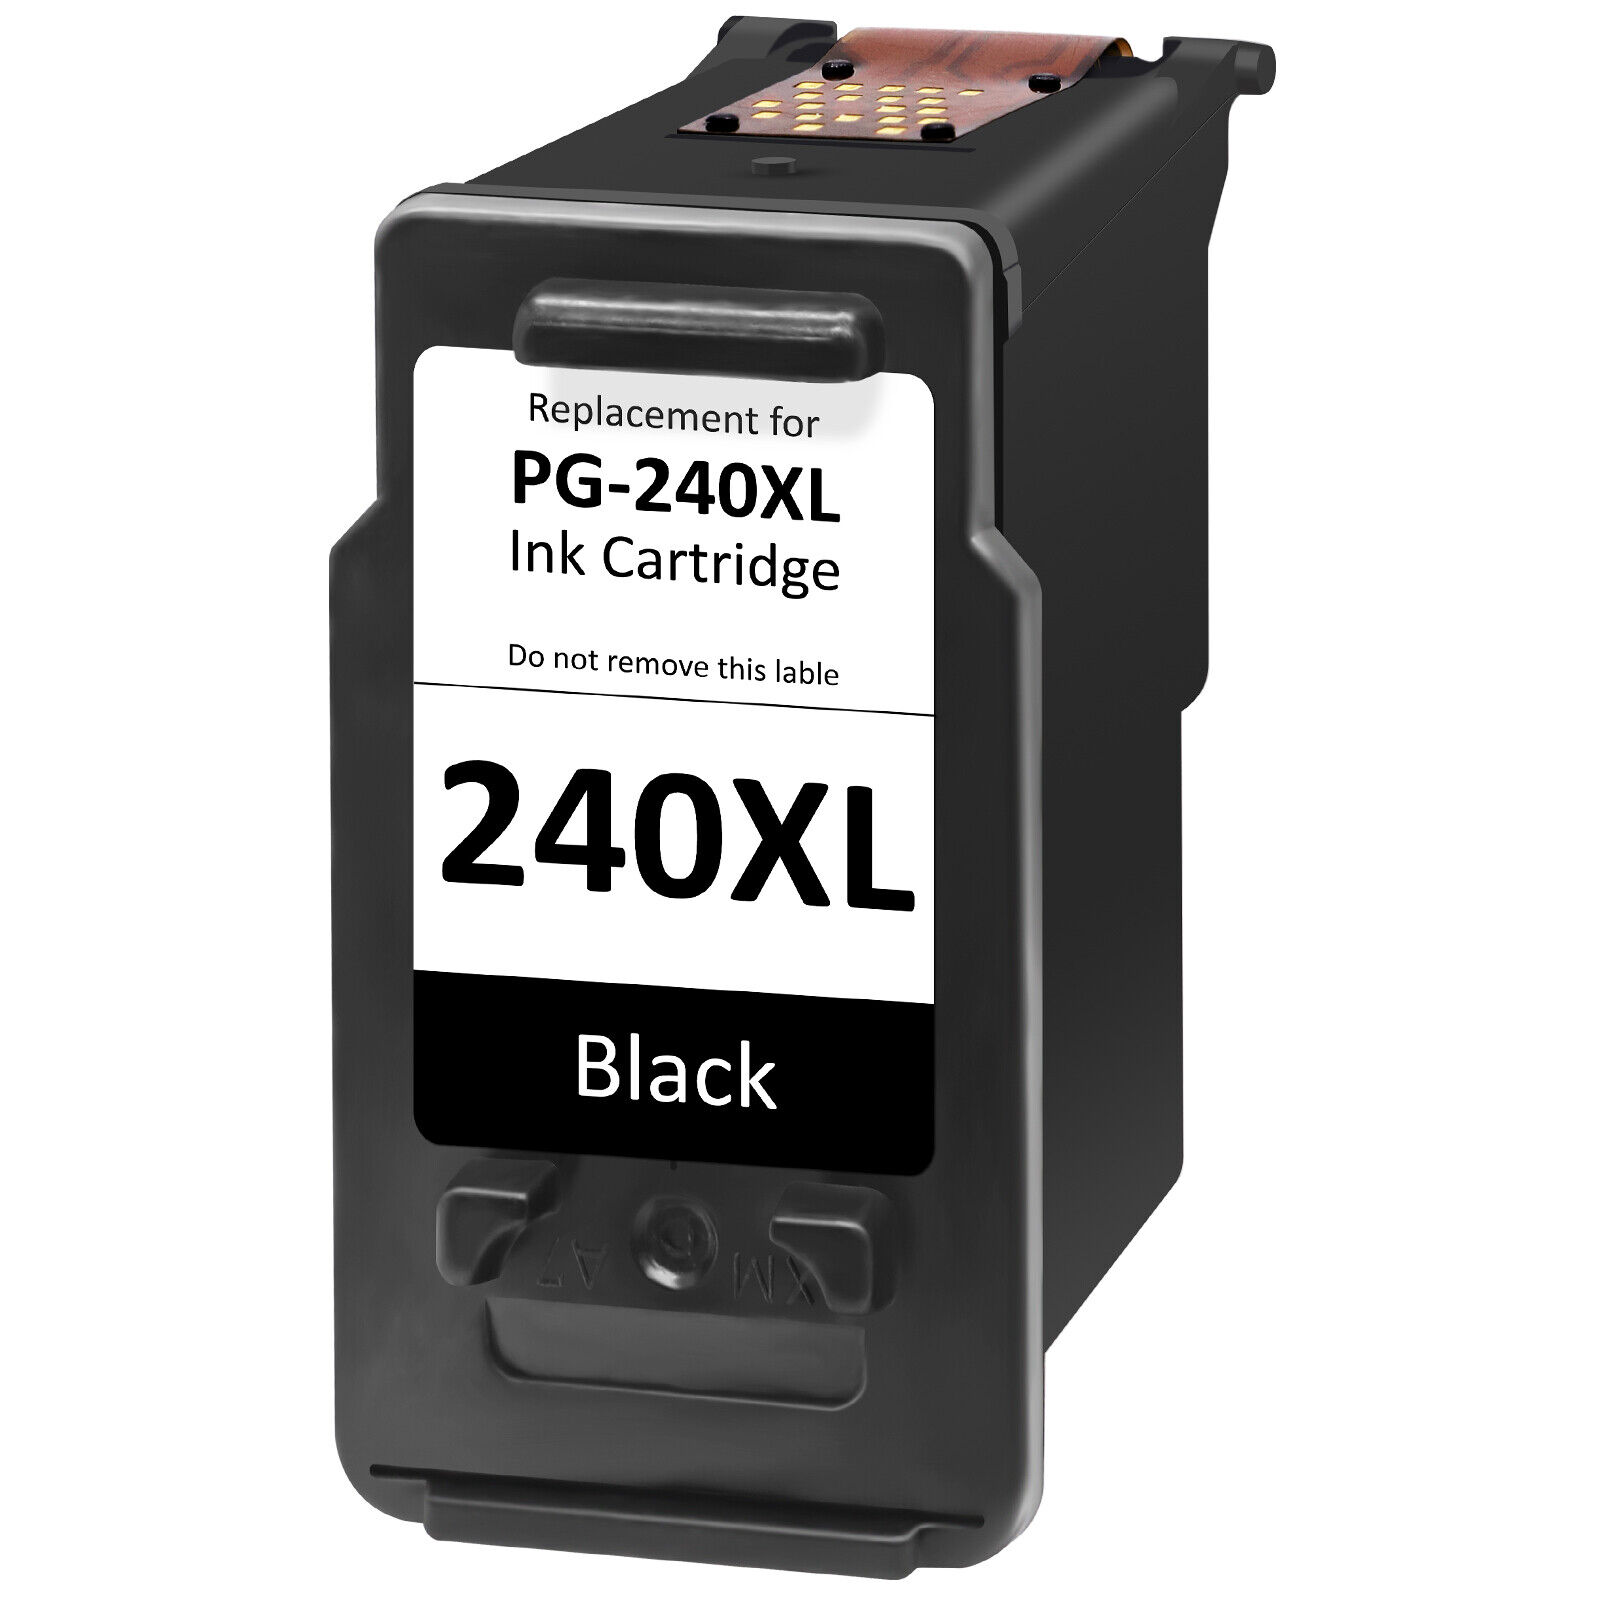 PG-240XL CL-241XL Black Color Ink Cartridge for Canon Pixma MG3620 MG3520 MG2220